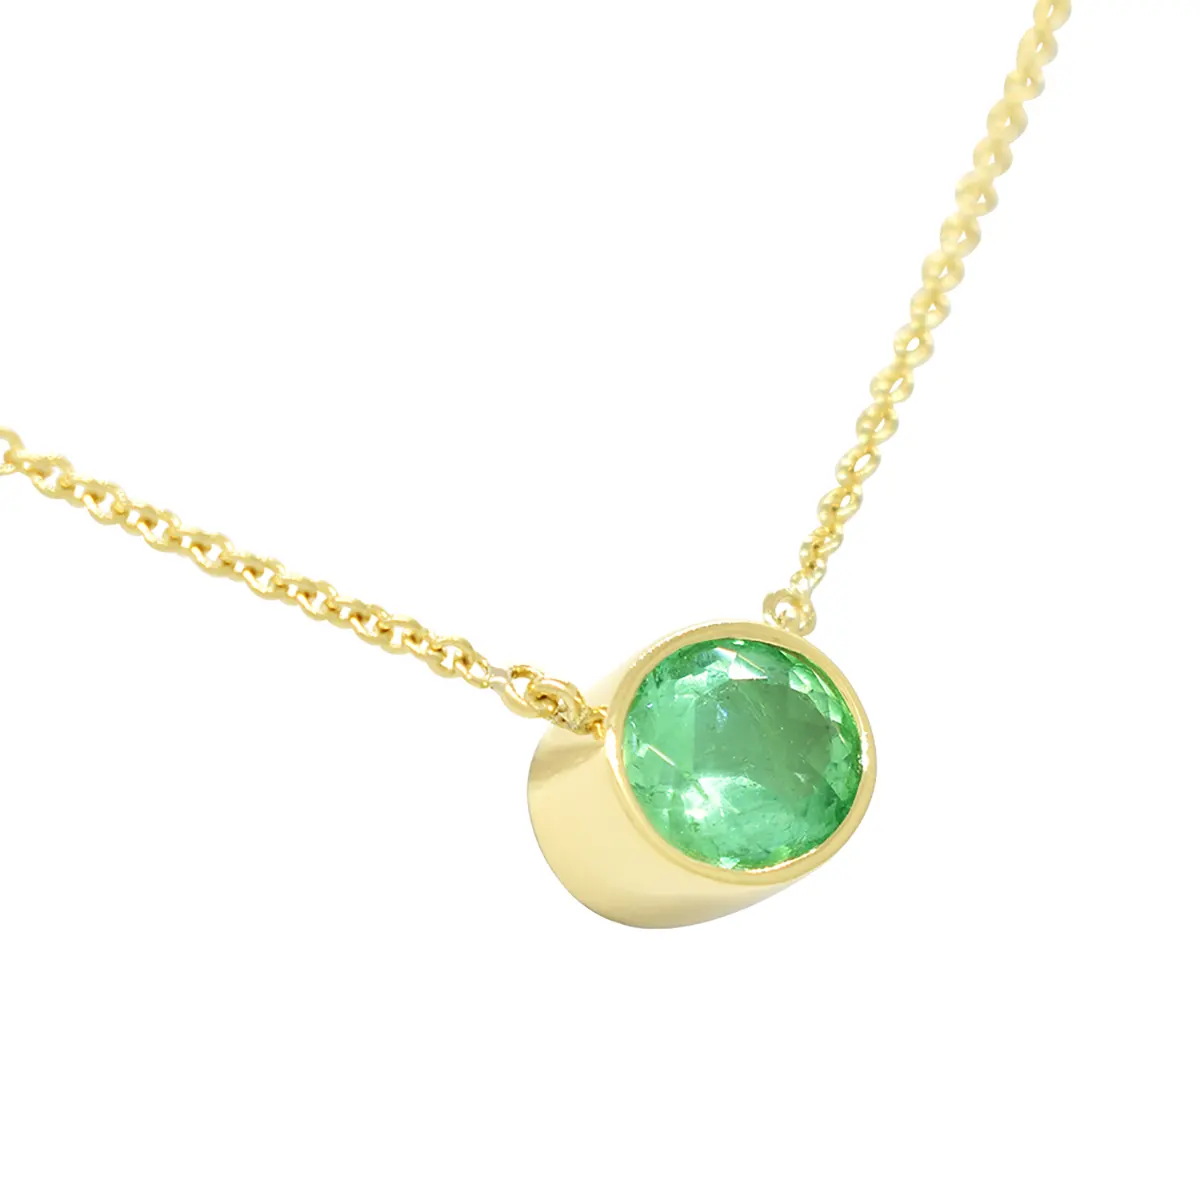 bezel-set-solitaire-emerald-necklace-in-18k-yellow-gold-with-oval-shape-emerald